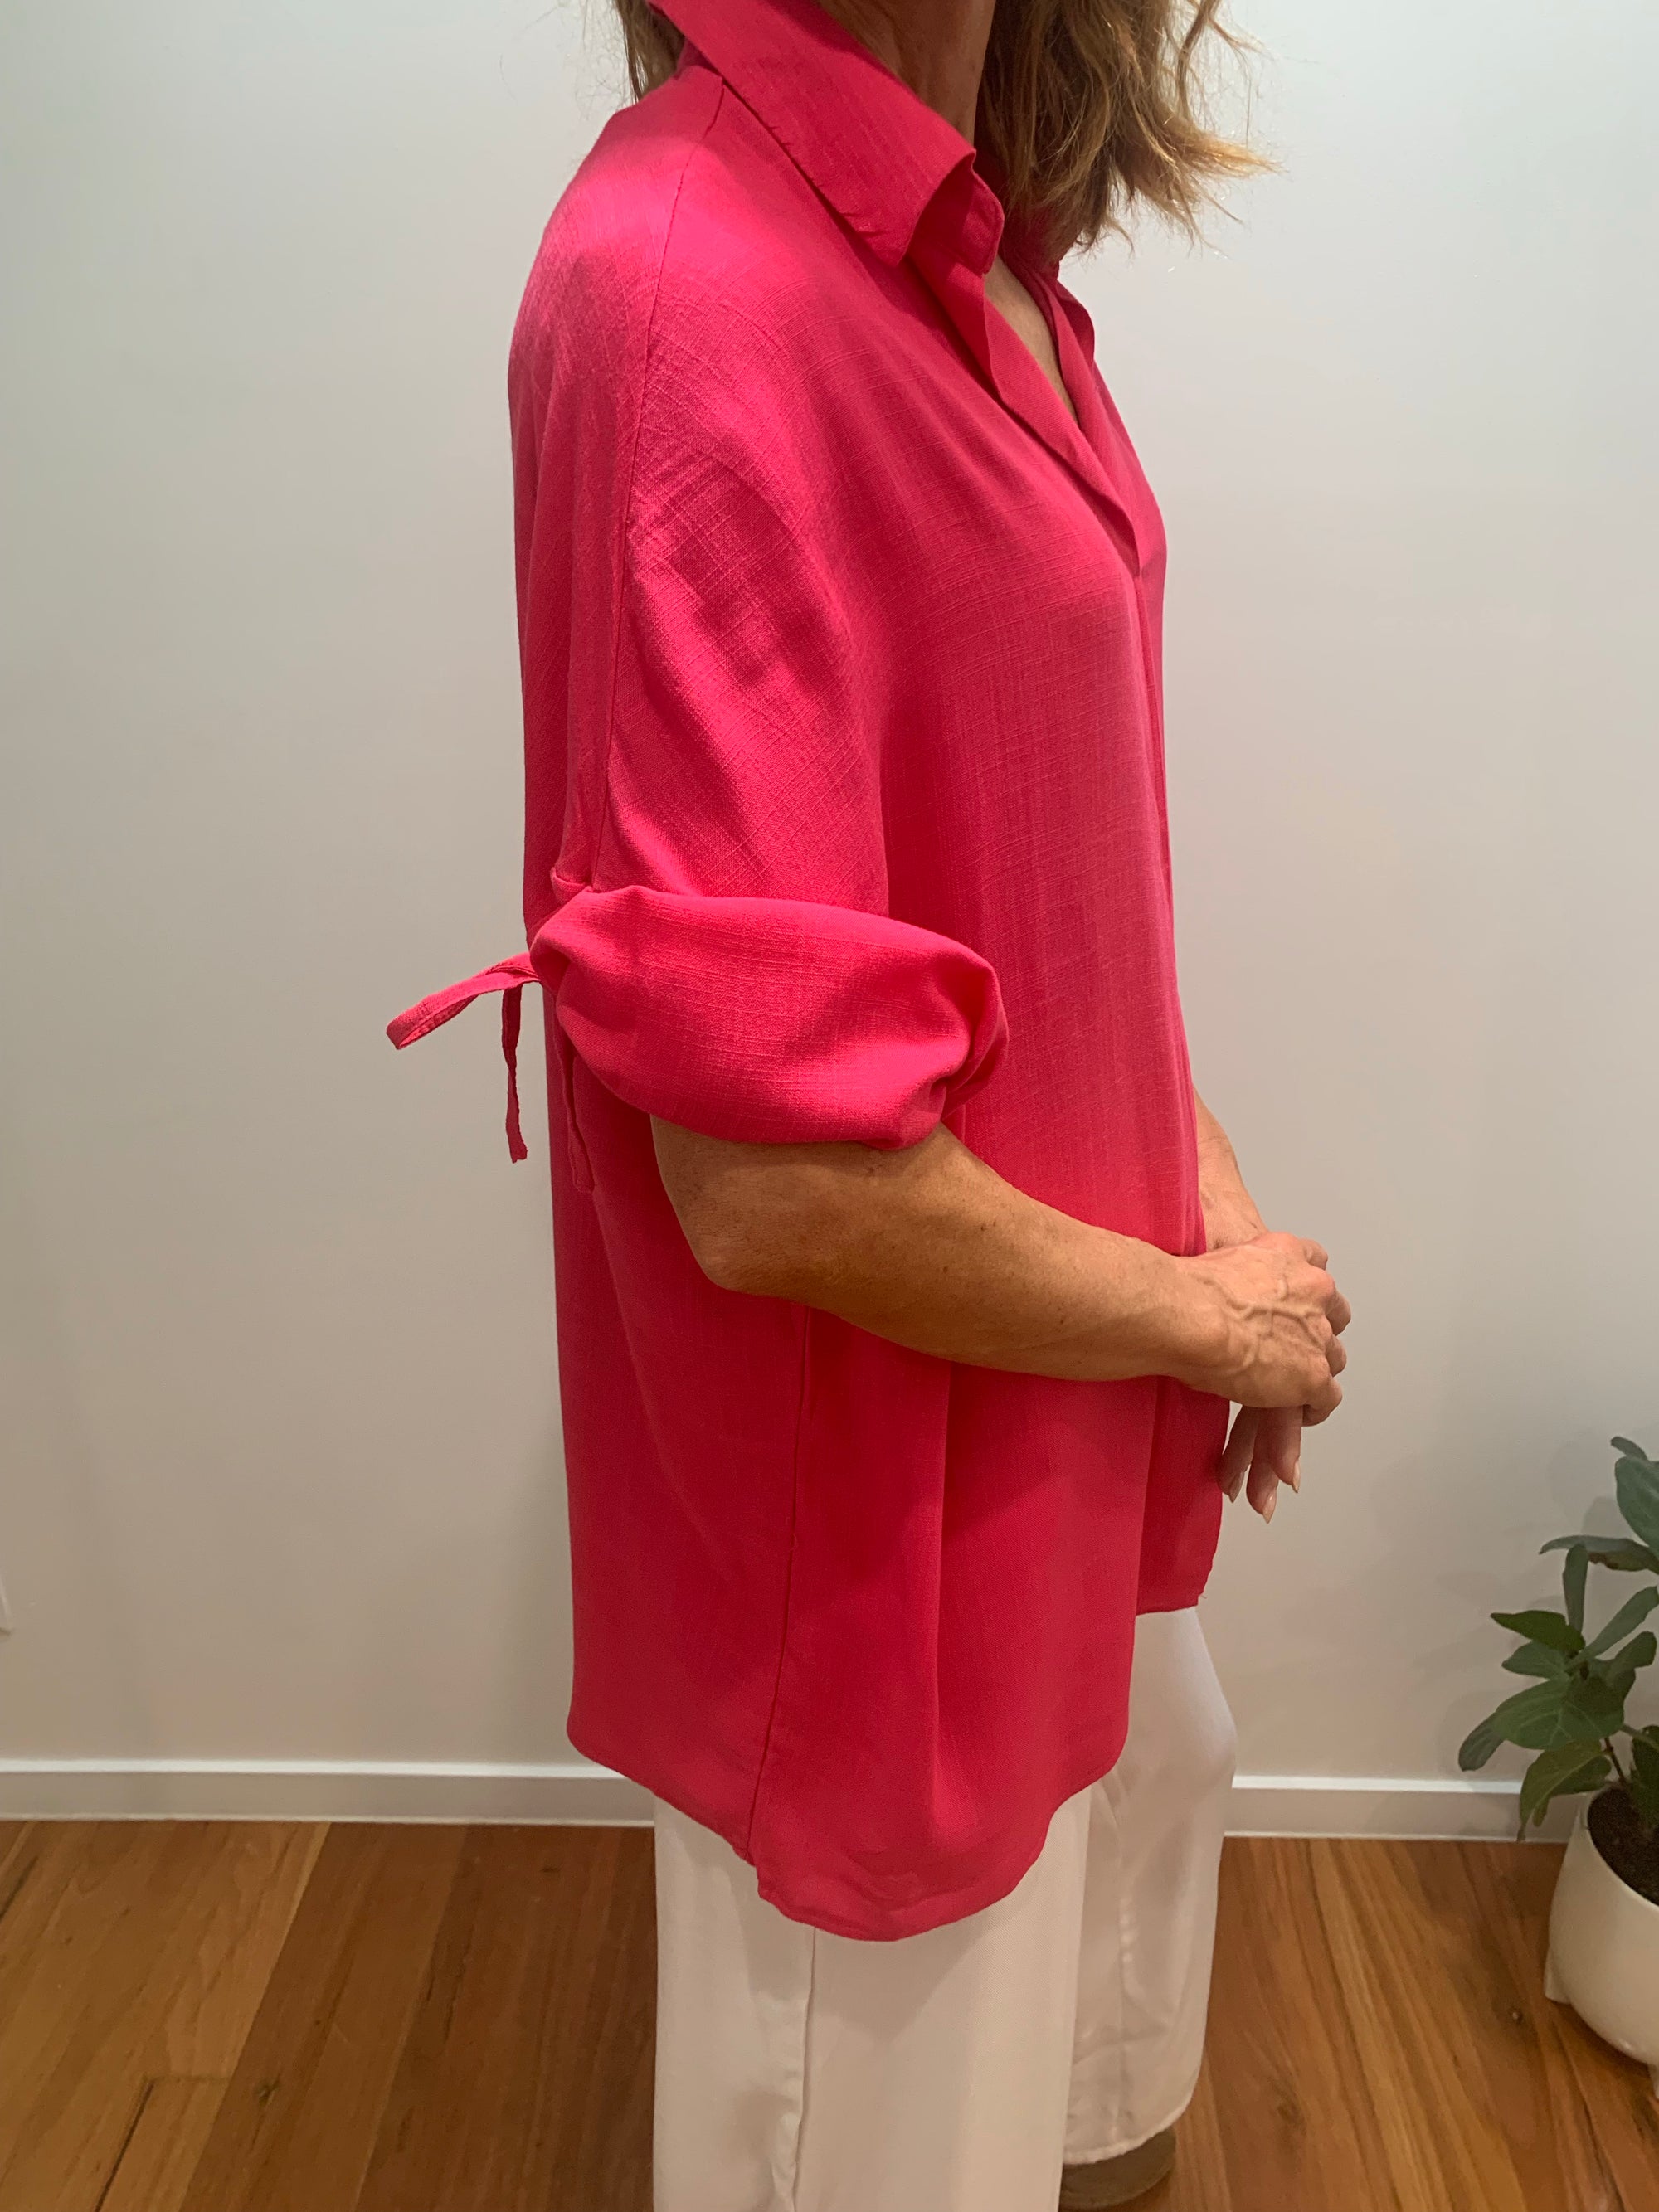 Hot Pink Top with Tie Sleeves and Collar in Comfortable Rayon